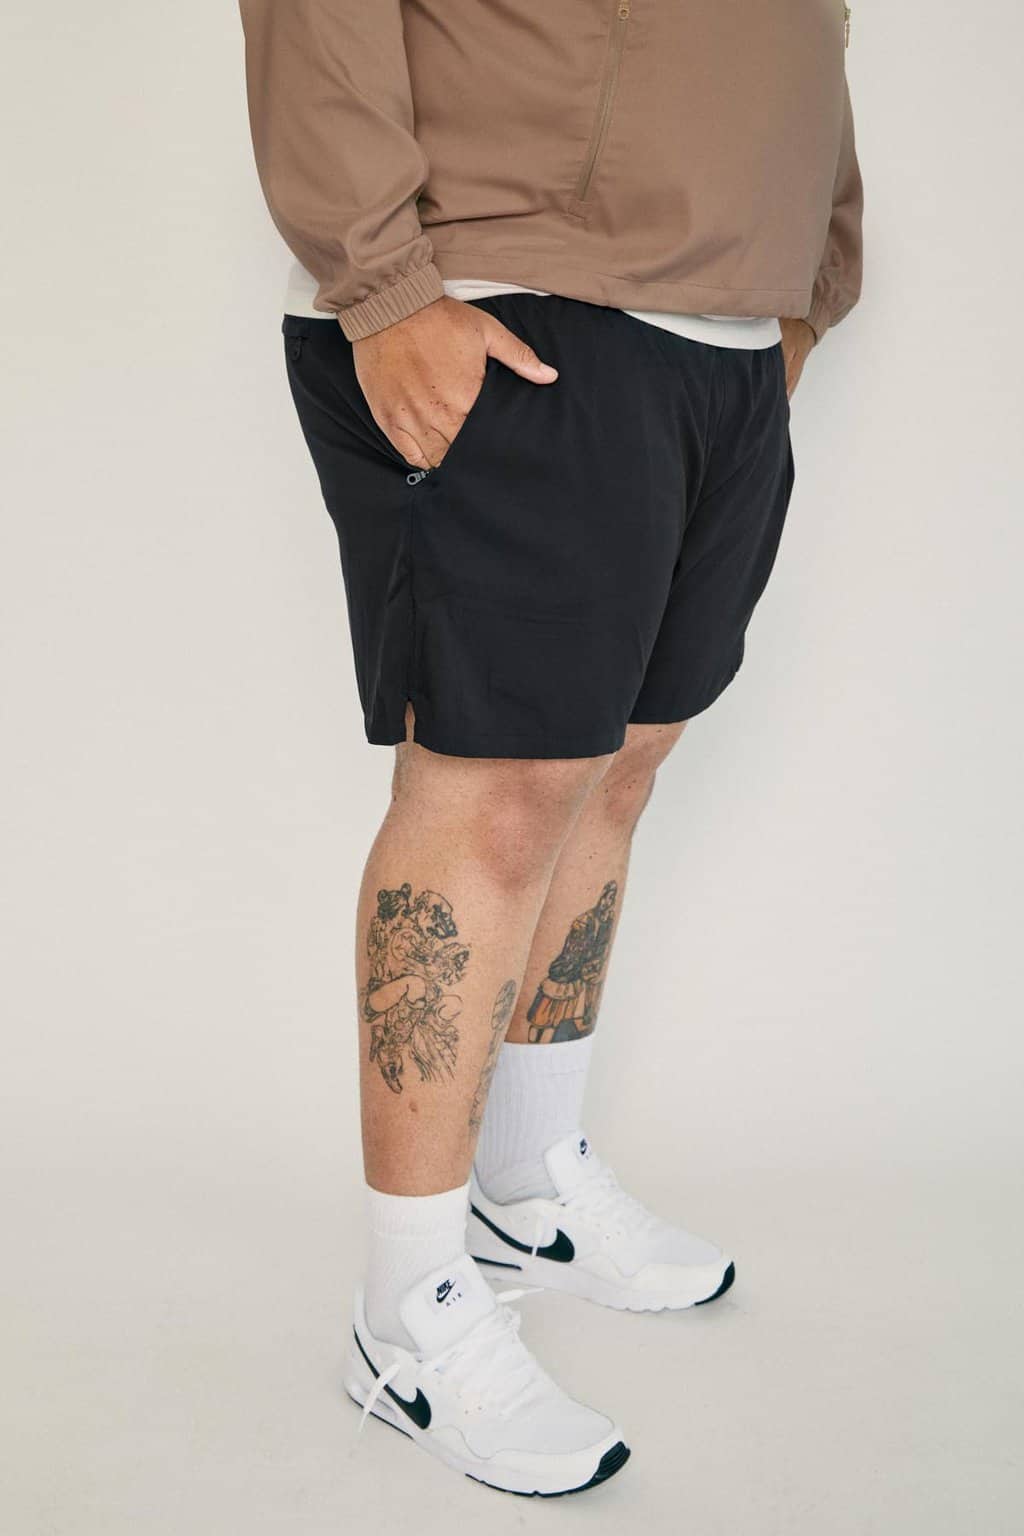 Girlfriend Collective mens shorts